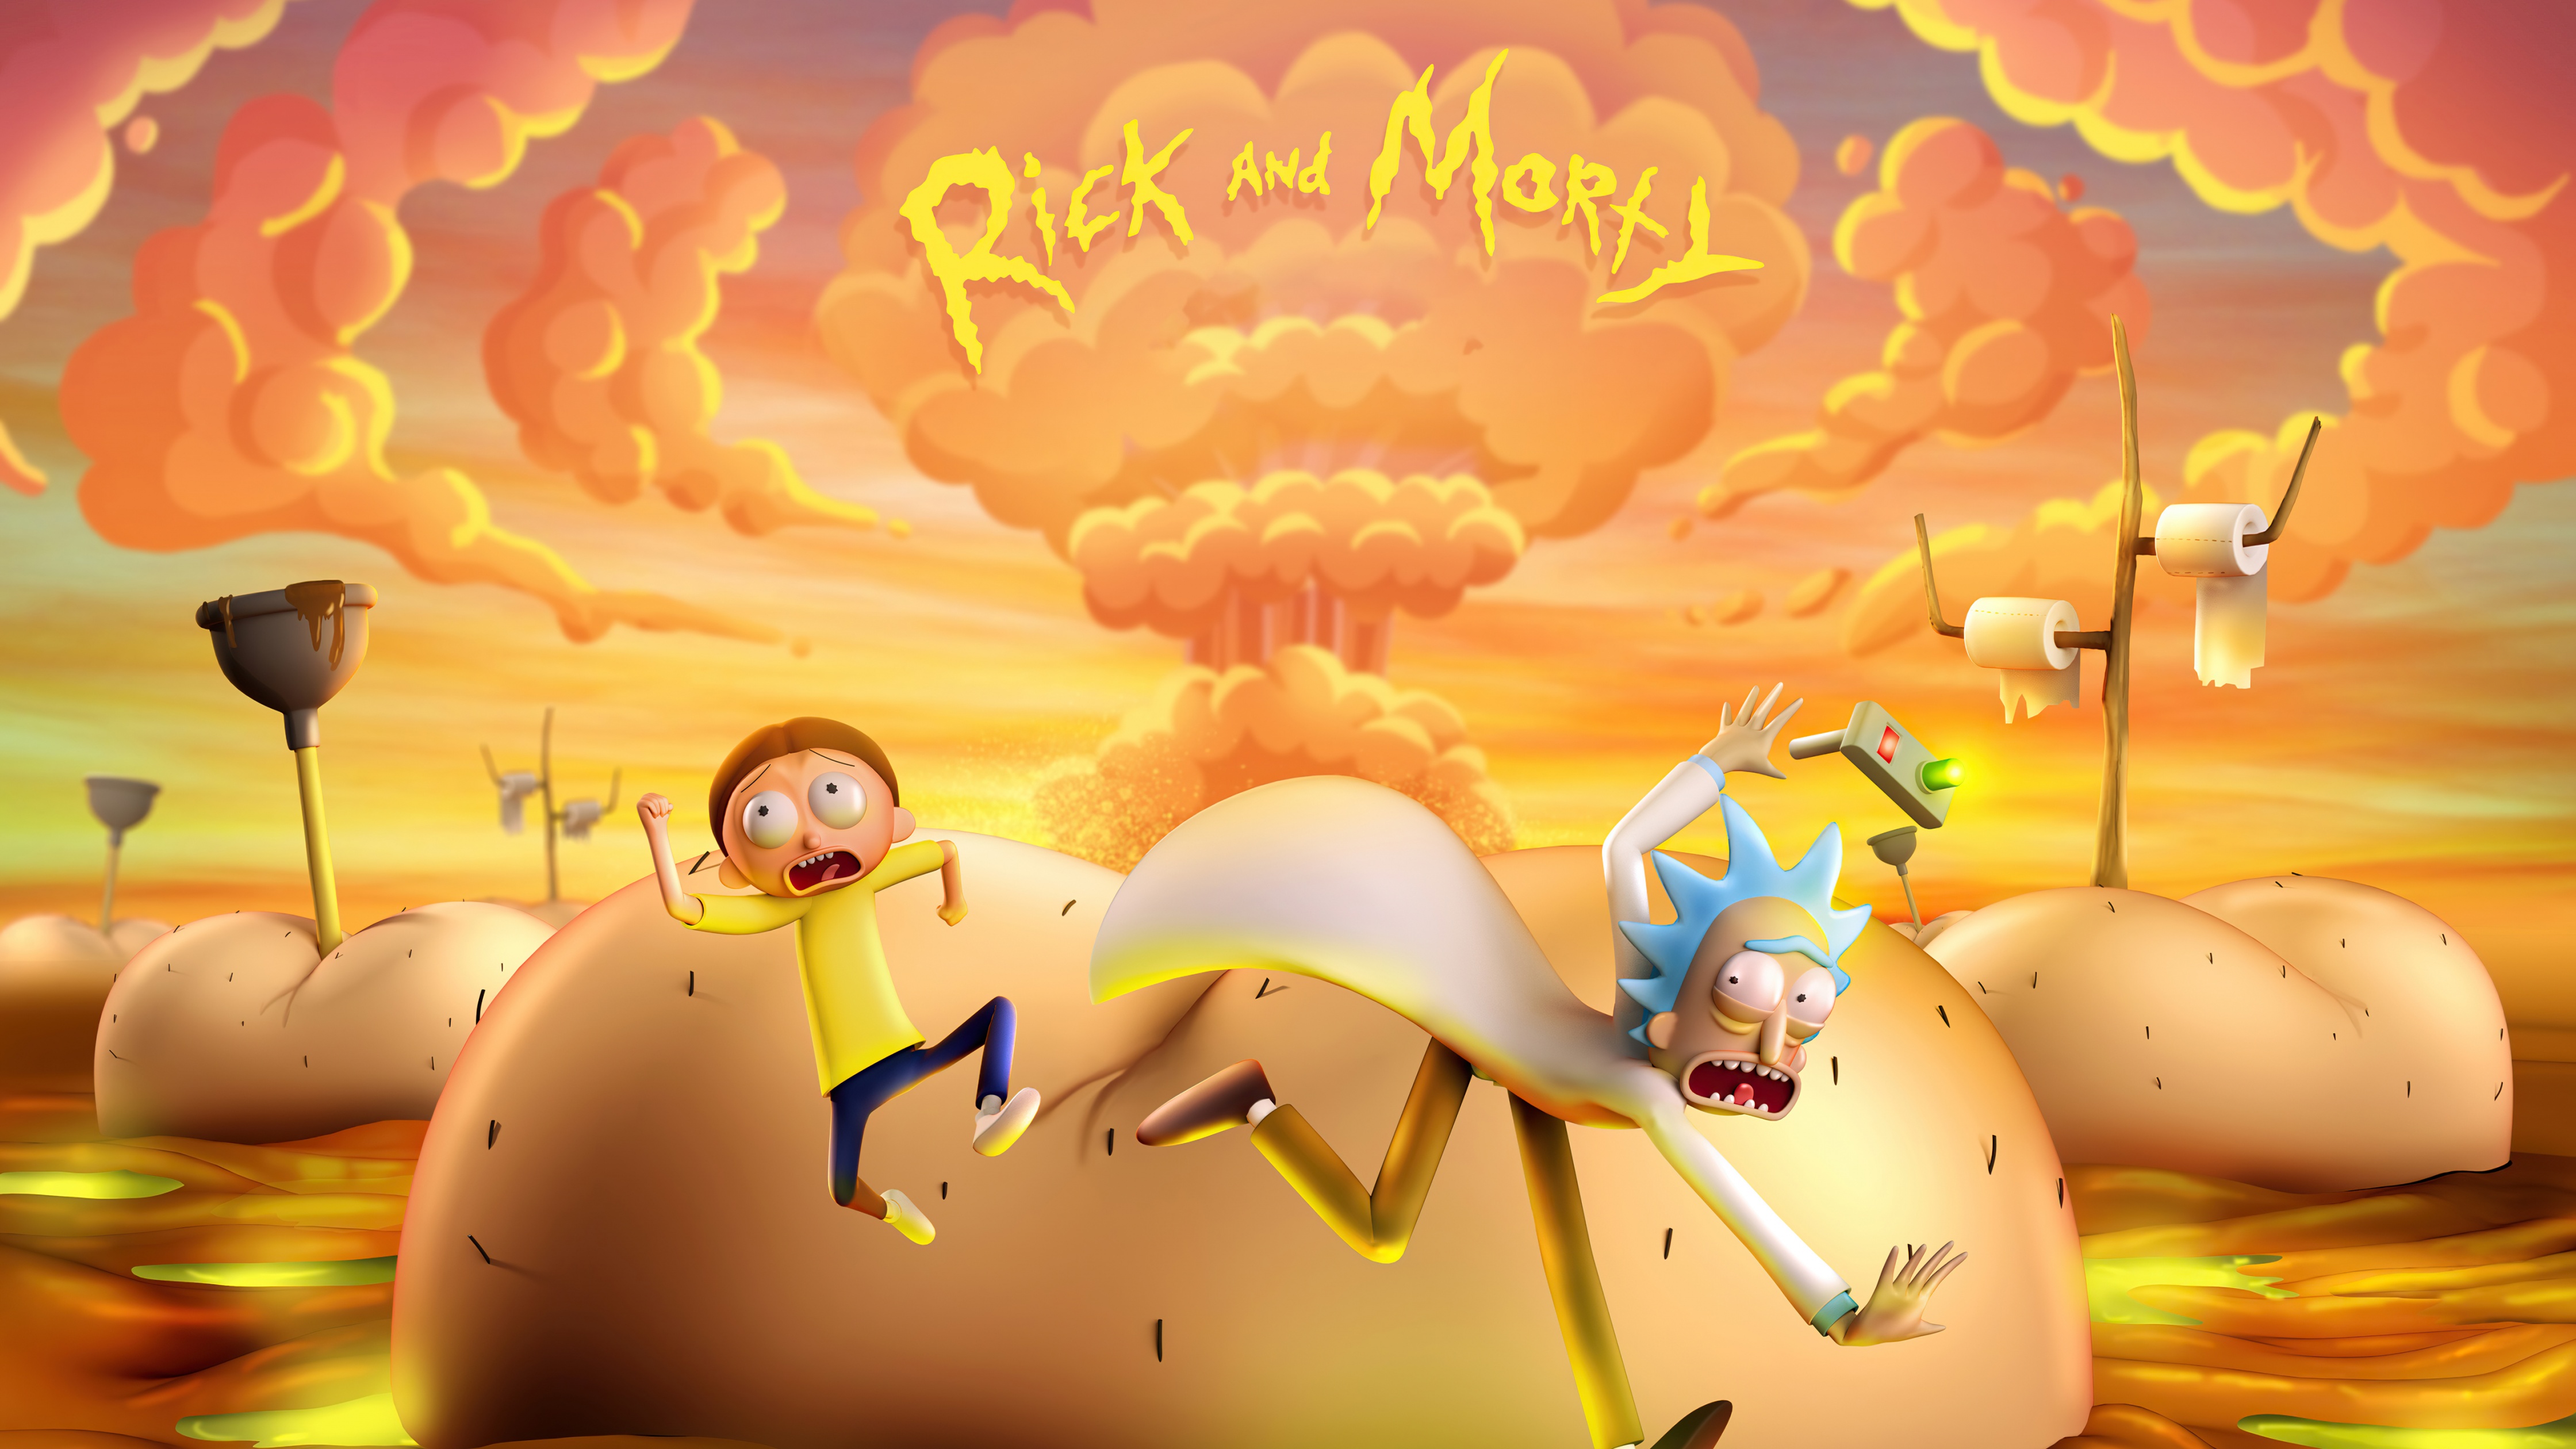 Cool Rick and Morty Wallpapers - Rick Sanchez Wallpapers iPhone